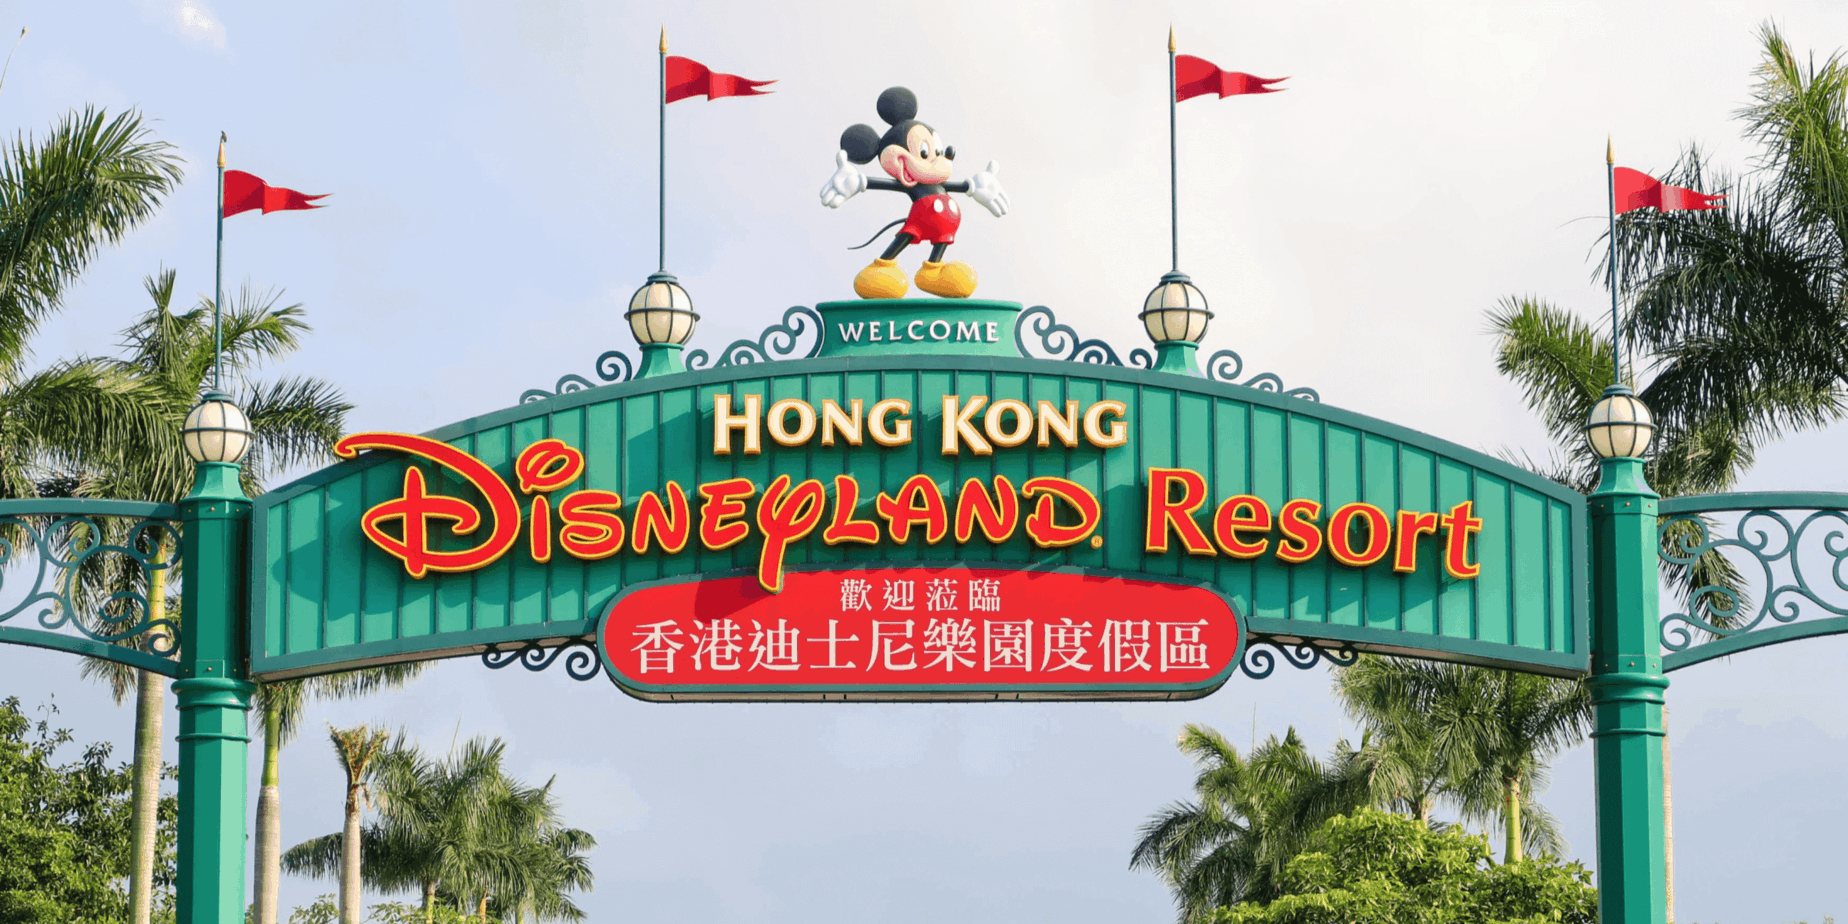 Hong Kong with Disney Land Package